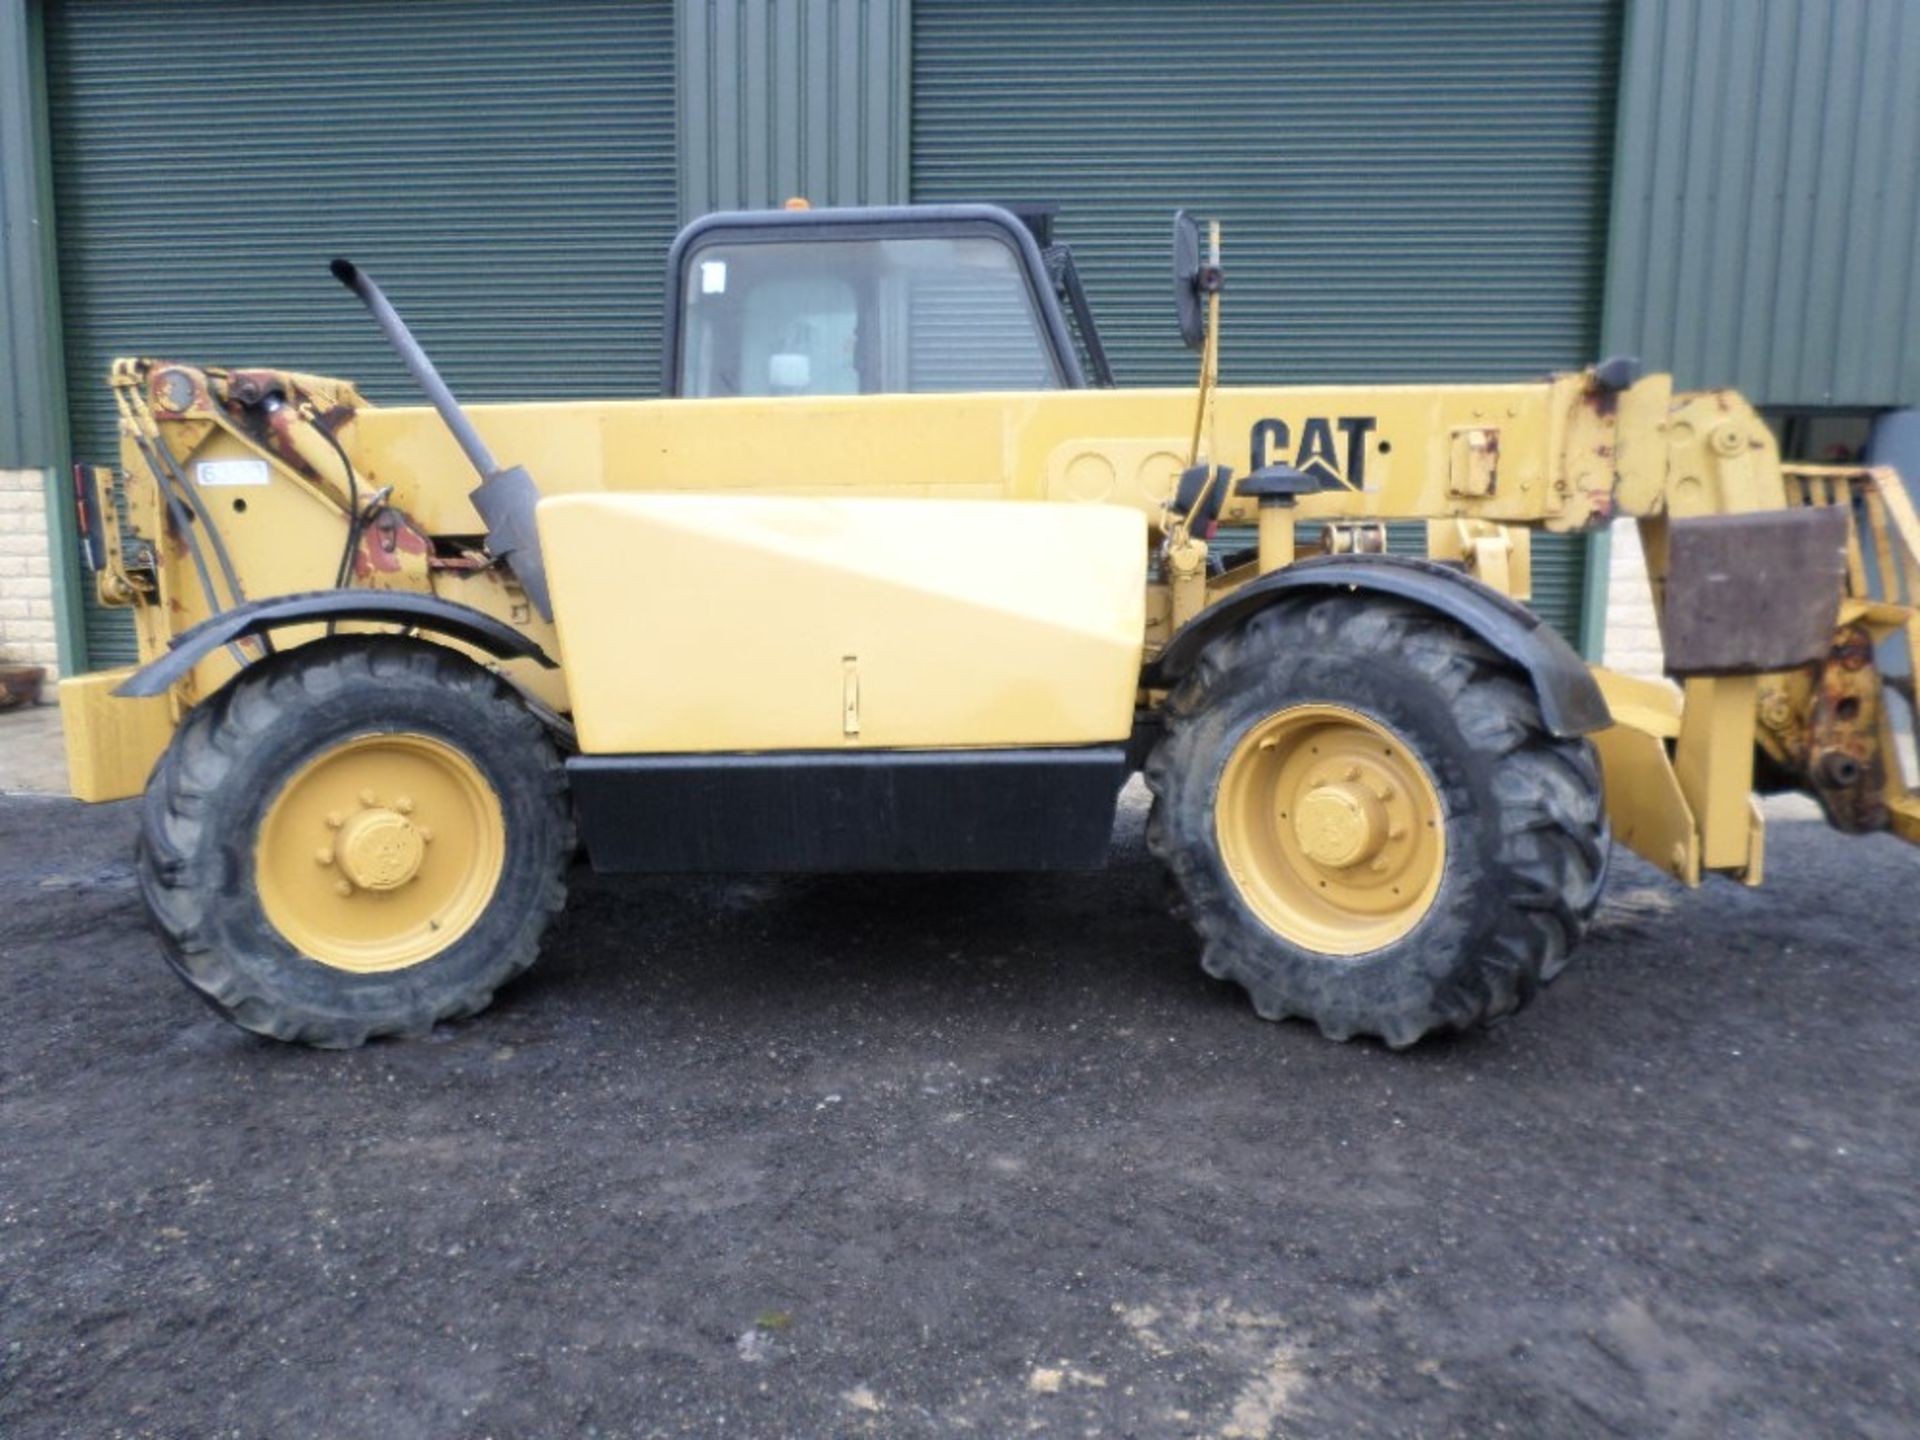 1999 CAT TH63 TELEPORTER (LOCATION SHEFFIELD) 5612 HOURS (RING FOR COLLECTION DETAILS) [+ VAT] - Image 10 of 13